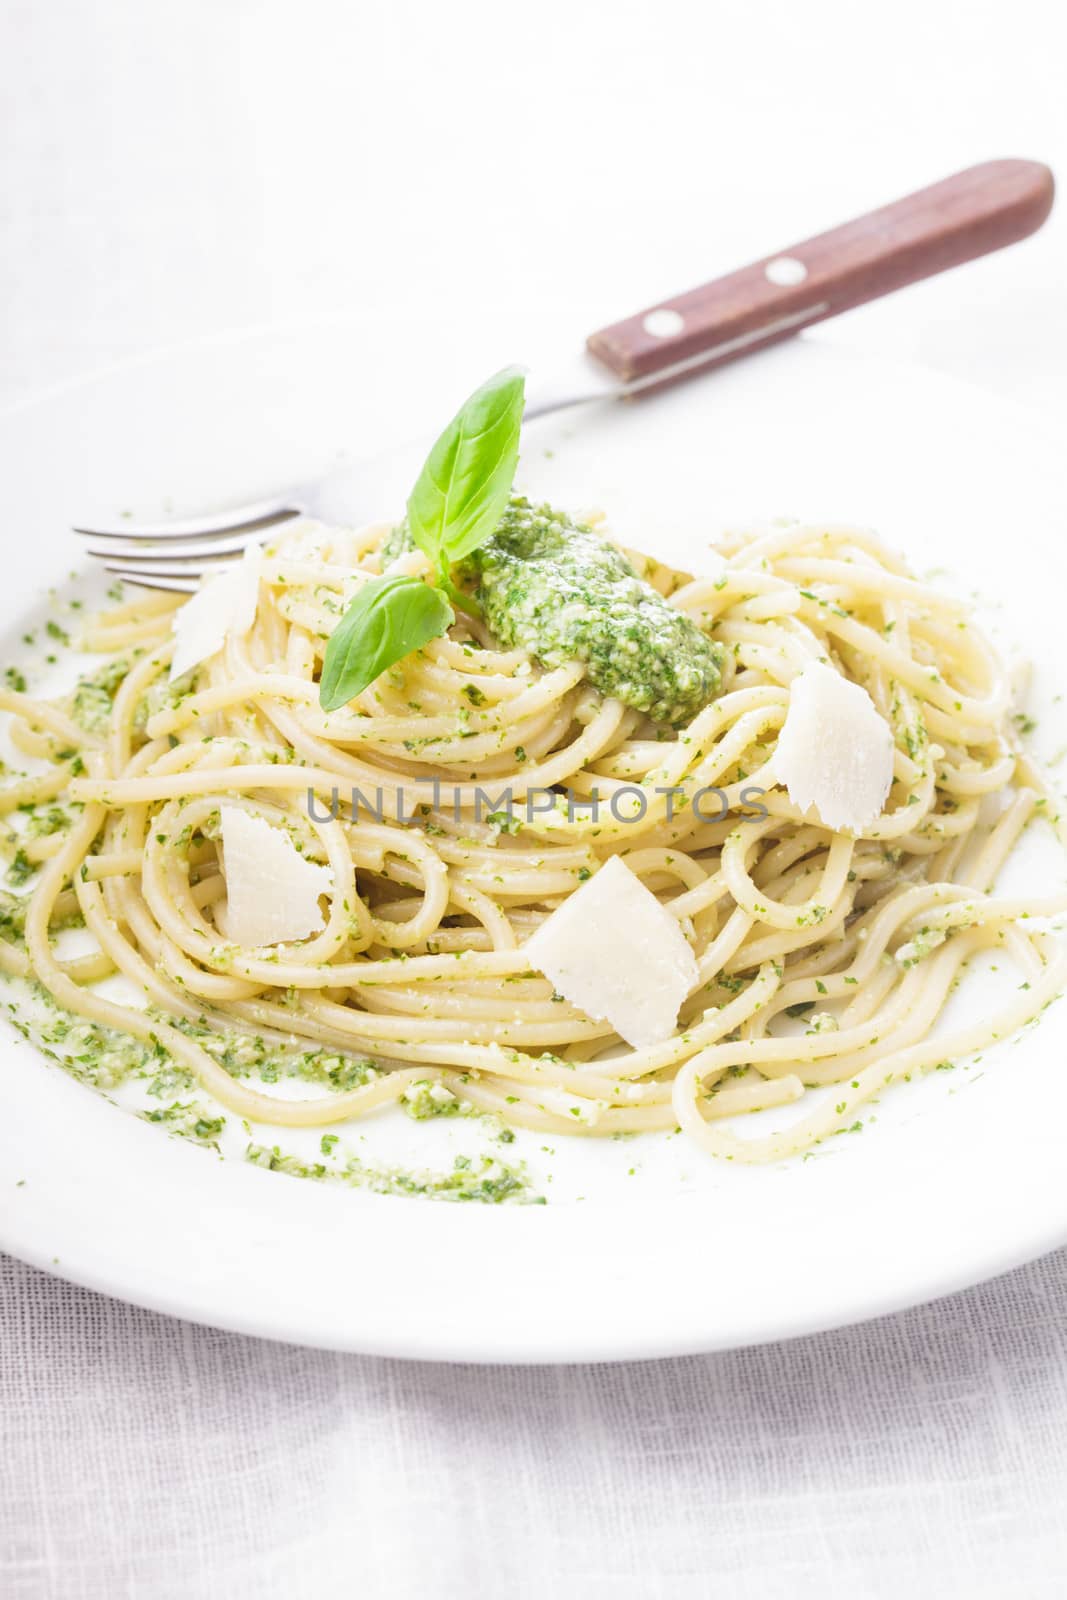 Spaghetti with green pesto and parmesan on the plate